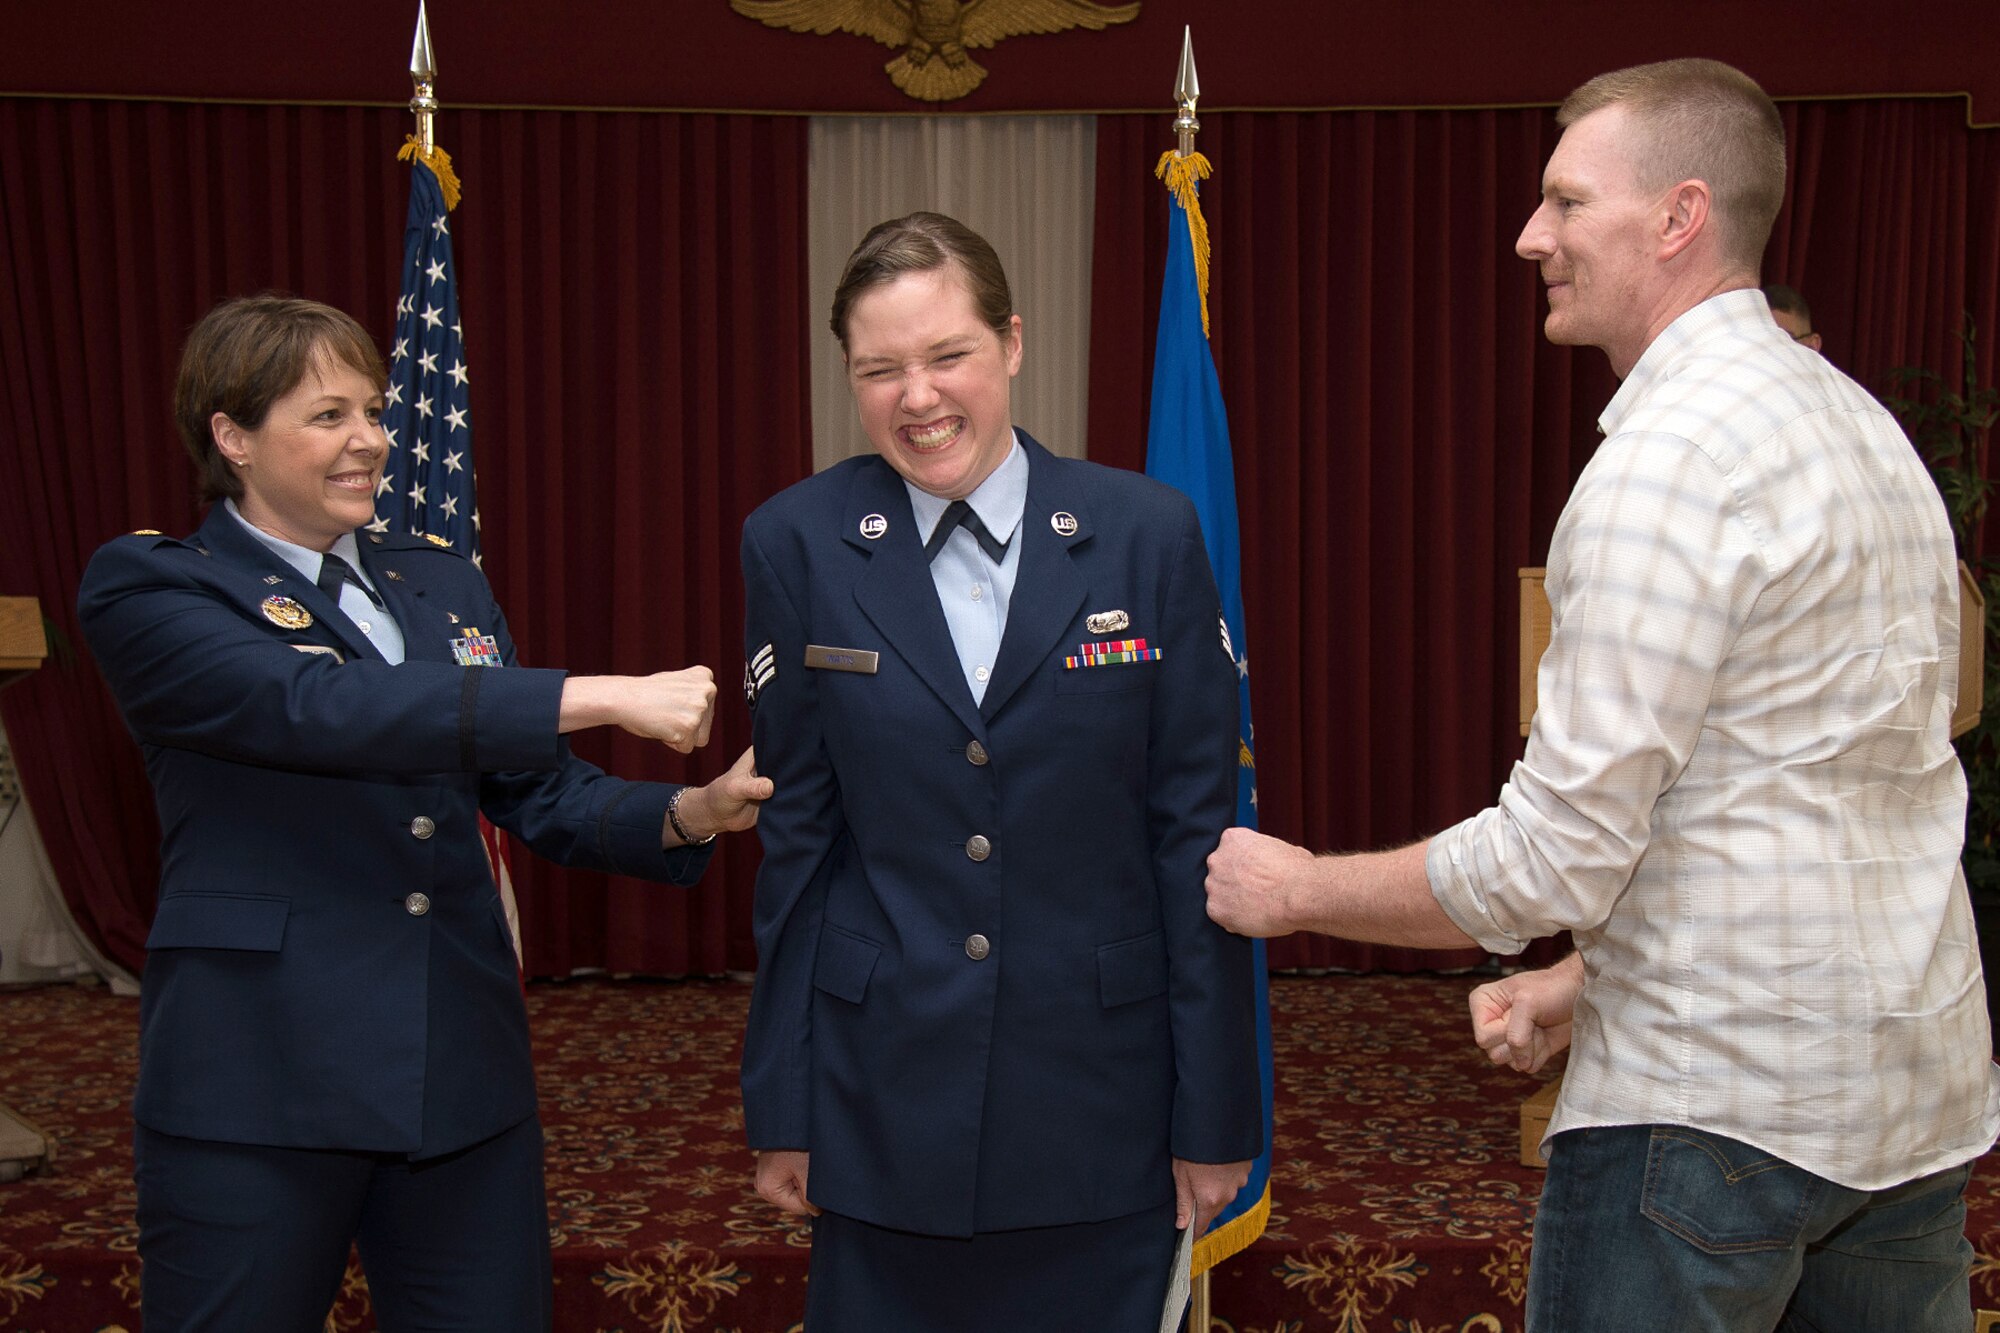 Senior Airman Kara Watts, 66th Comptroller Squadron administration specialist, has her new stripes tacked on by her parents, Maj. Tobie Wethington, and her dad, Brian, during the June enlisted promotion ceremony at the Minuteman Commons June 30. Both Watts and her mother are serving on active duty at the same time. (U.S. Air Force photo by Mark Herlihy)